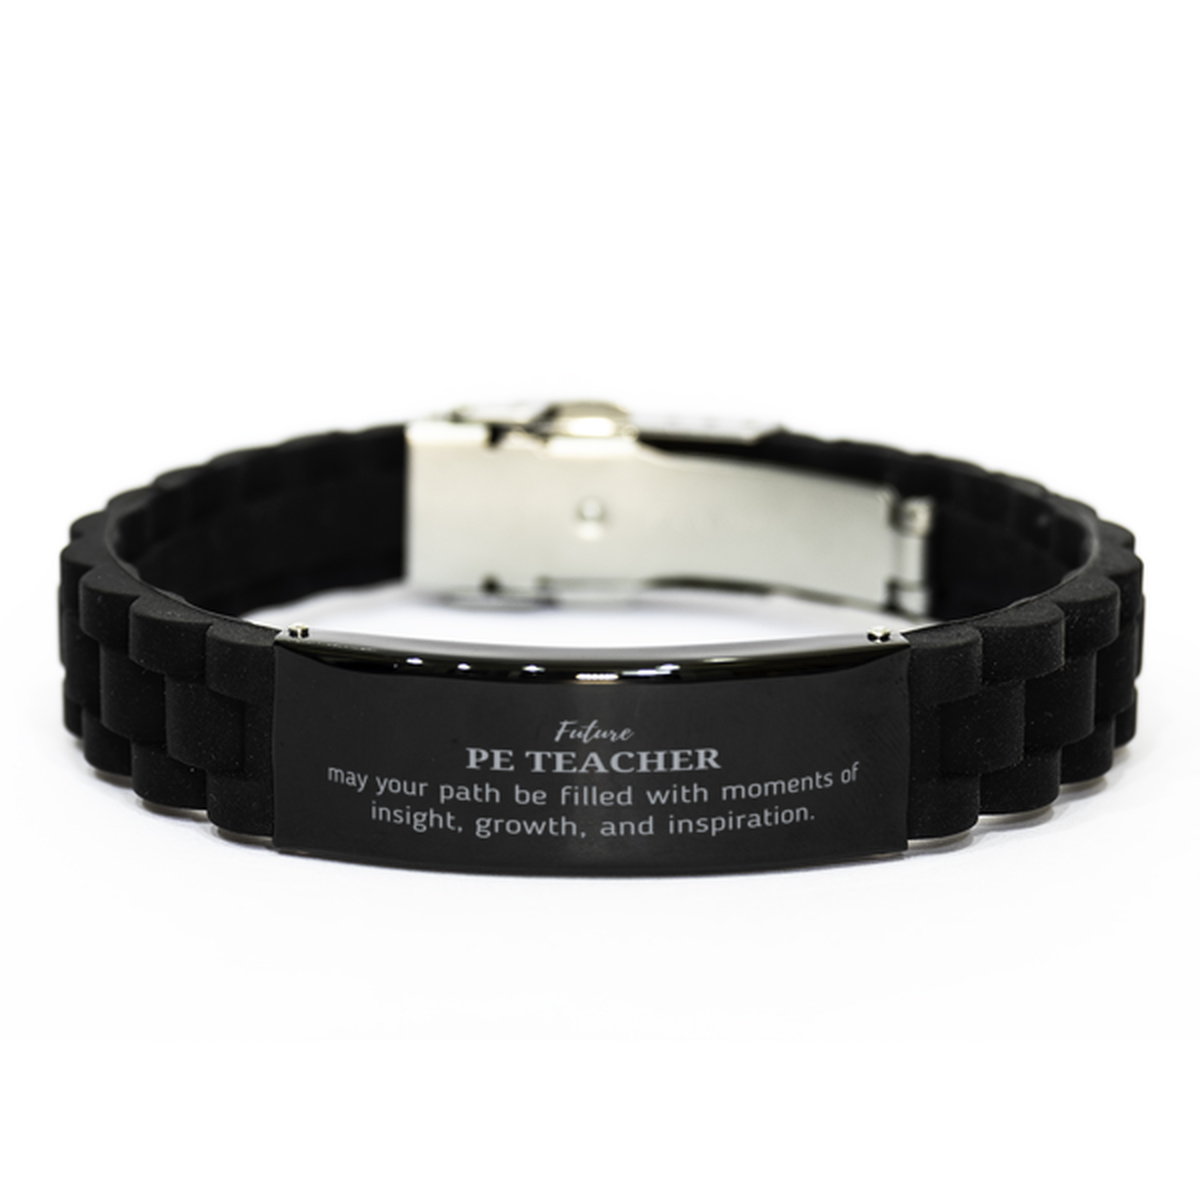 Future PE Teacher Gifts, May your path be filled with moments of insight, Graduation Gifts for New PE Teacher, Christmas Unique Black Glidelock Clasp Bracelet For Men, Women, Friends